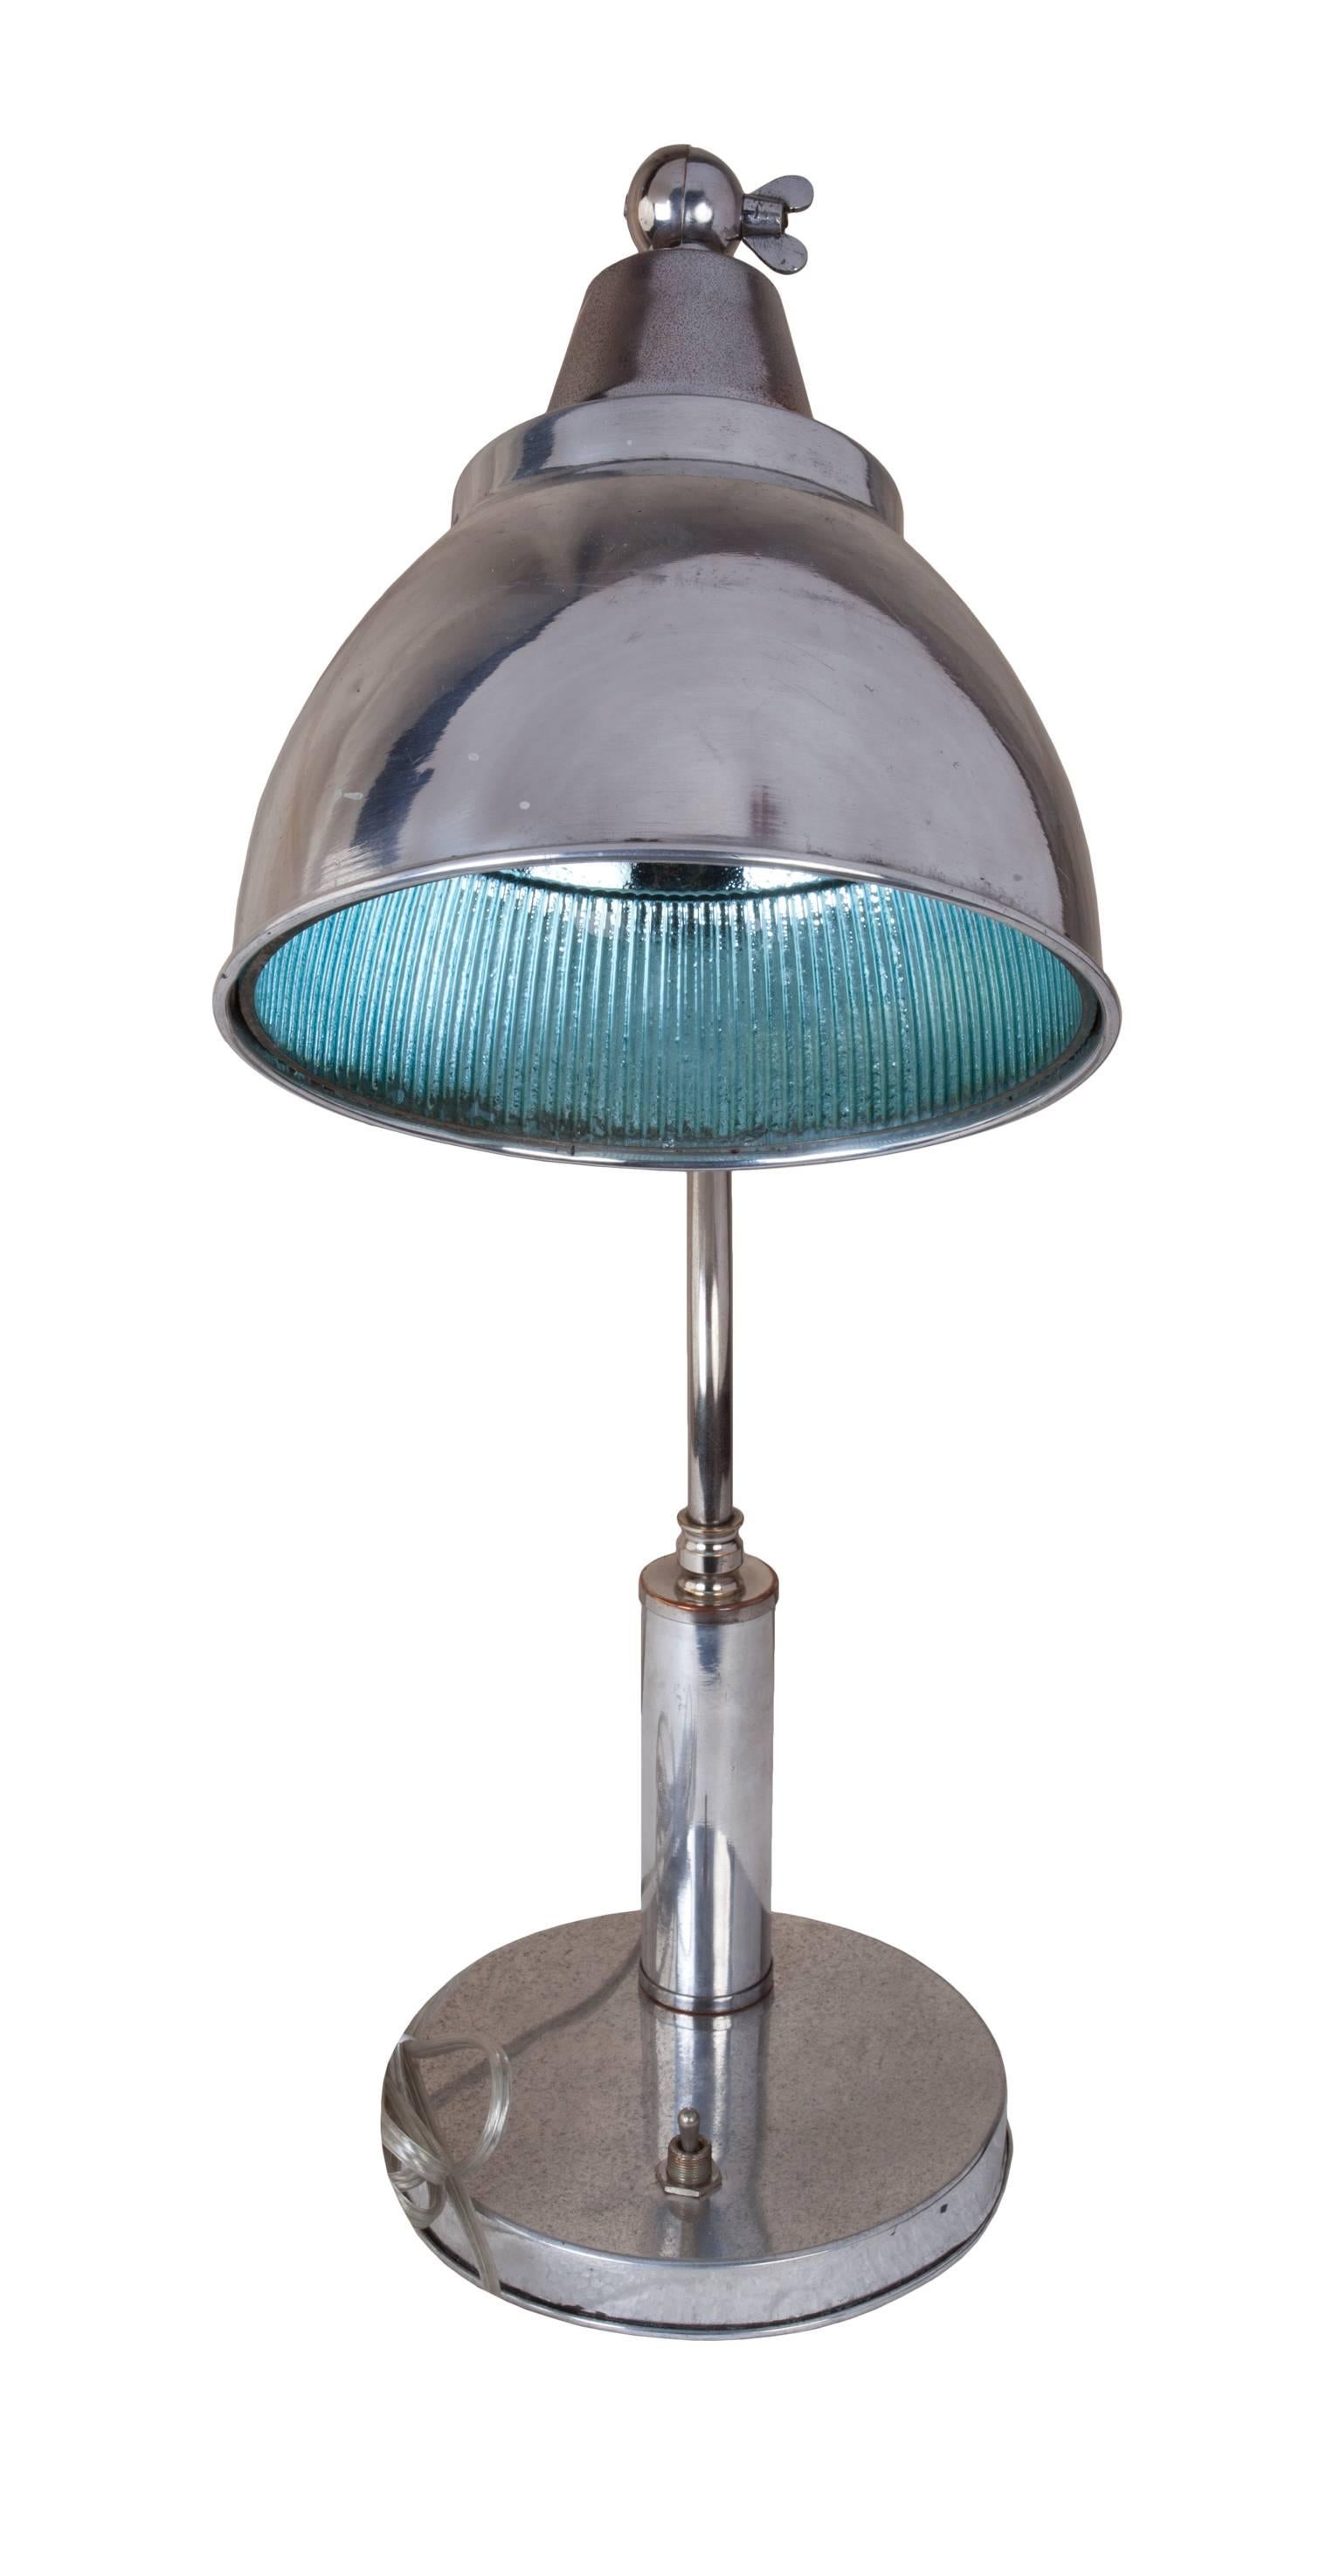 An adjustable ship's goose-neck table lamp in chrome from a Mid-Century merchant ship. The interior of the light's shade is glass-lined. It has been rewired for American use and takes a regular size light bulb. On/off switch at the base. Diameter of